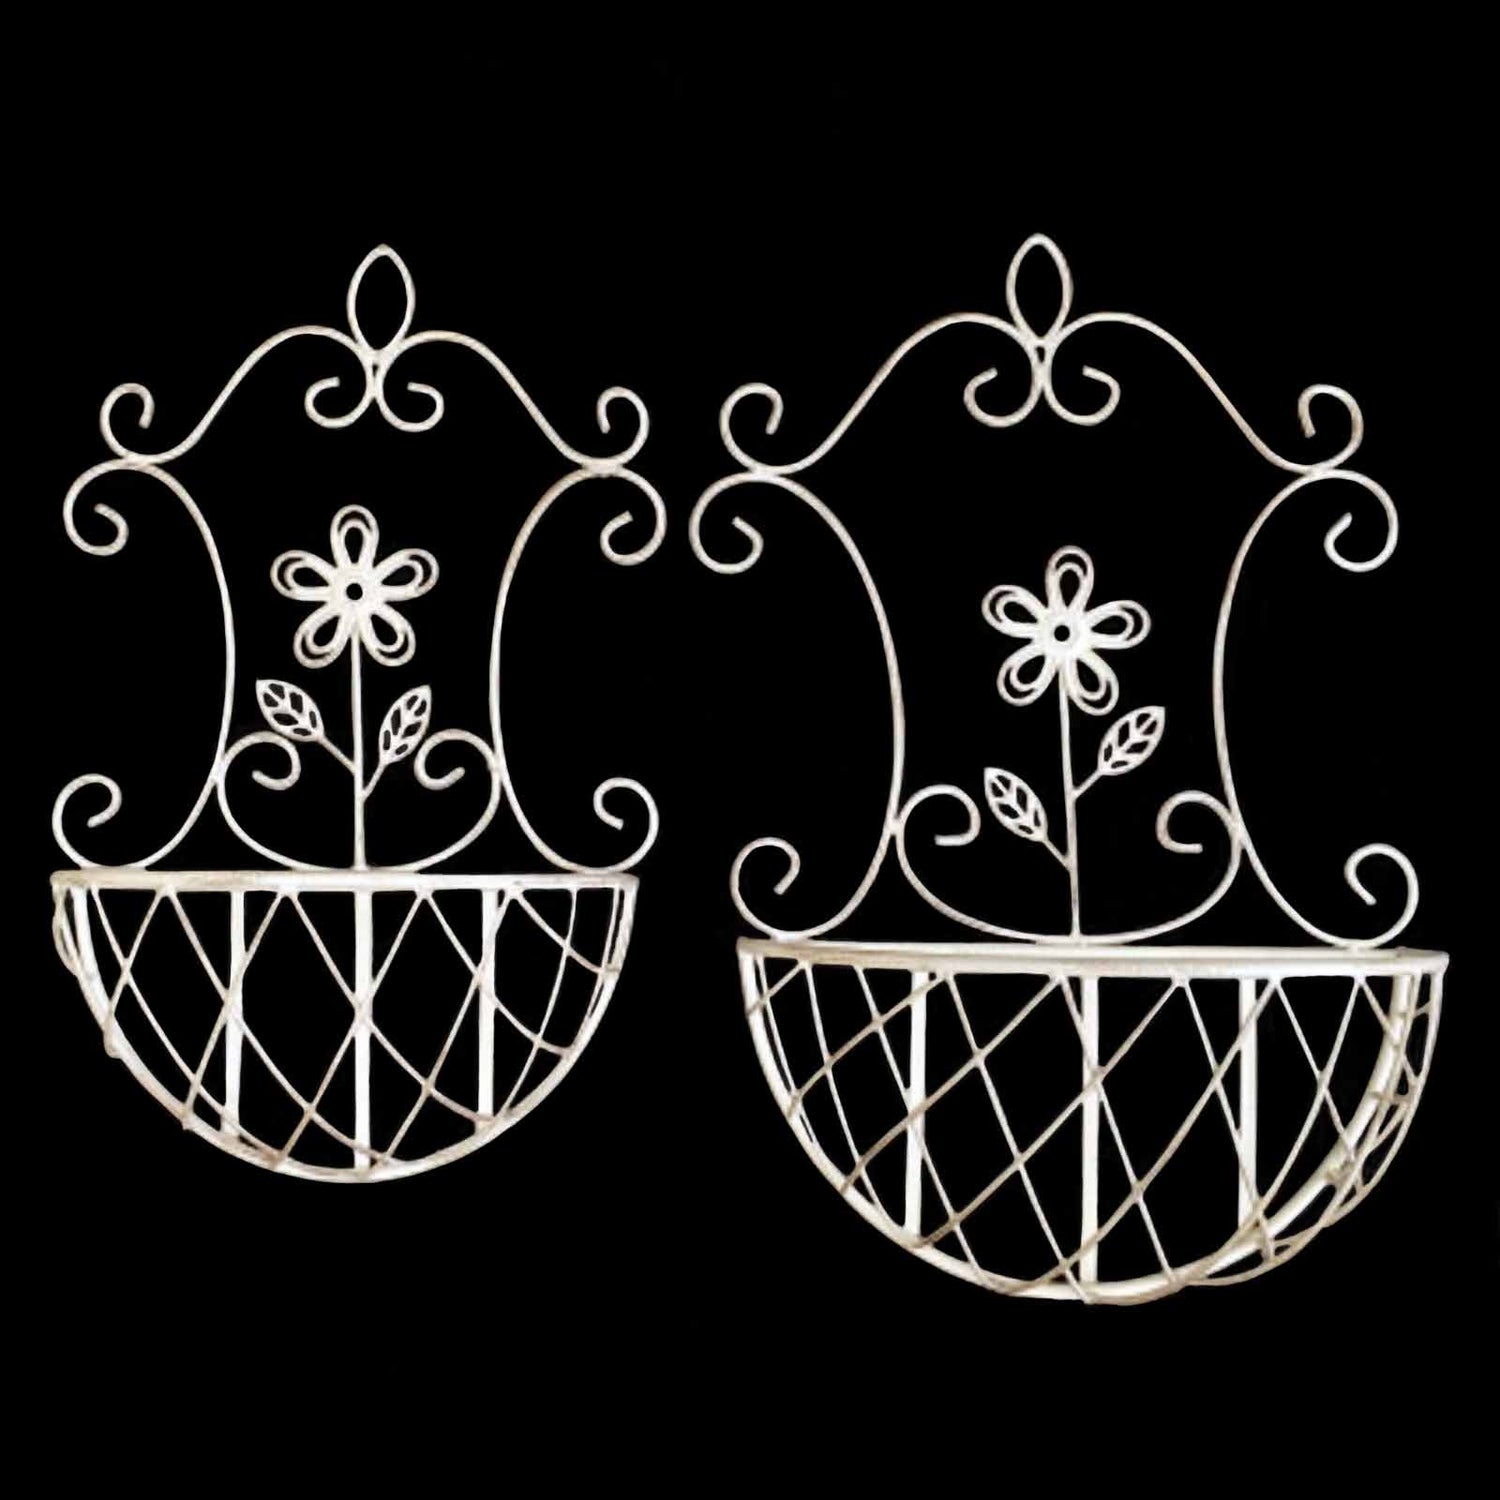 White Metal Ornamental Baskets Wall Planters - both large and small